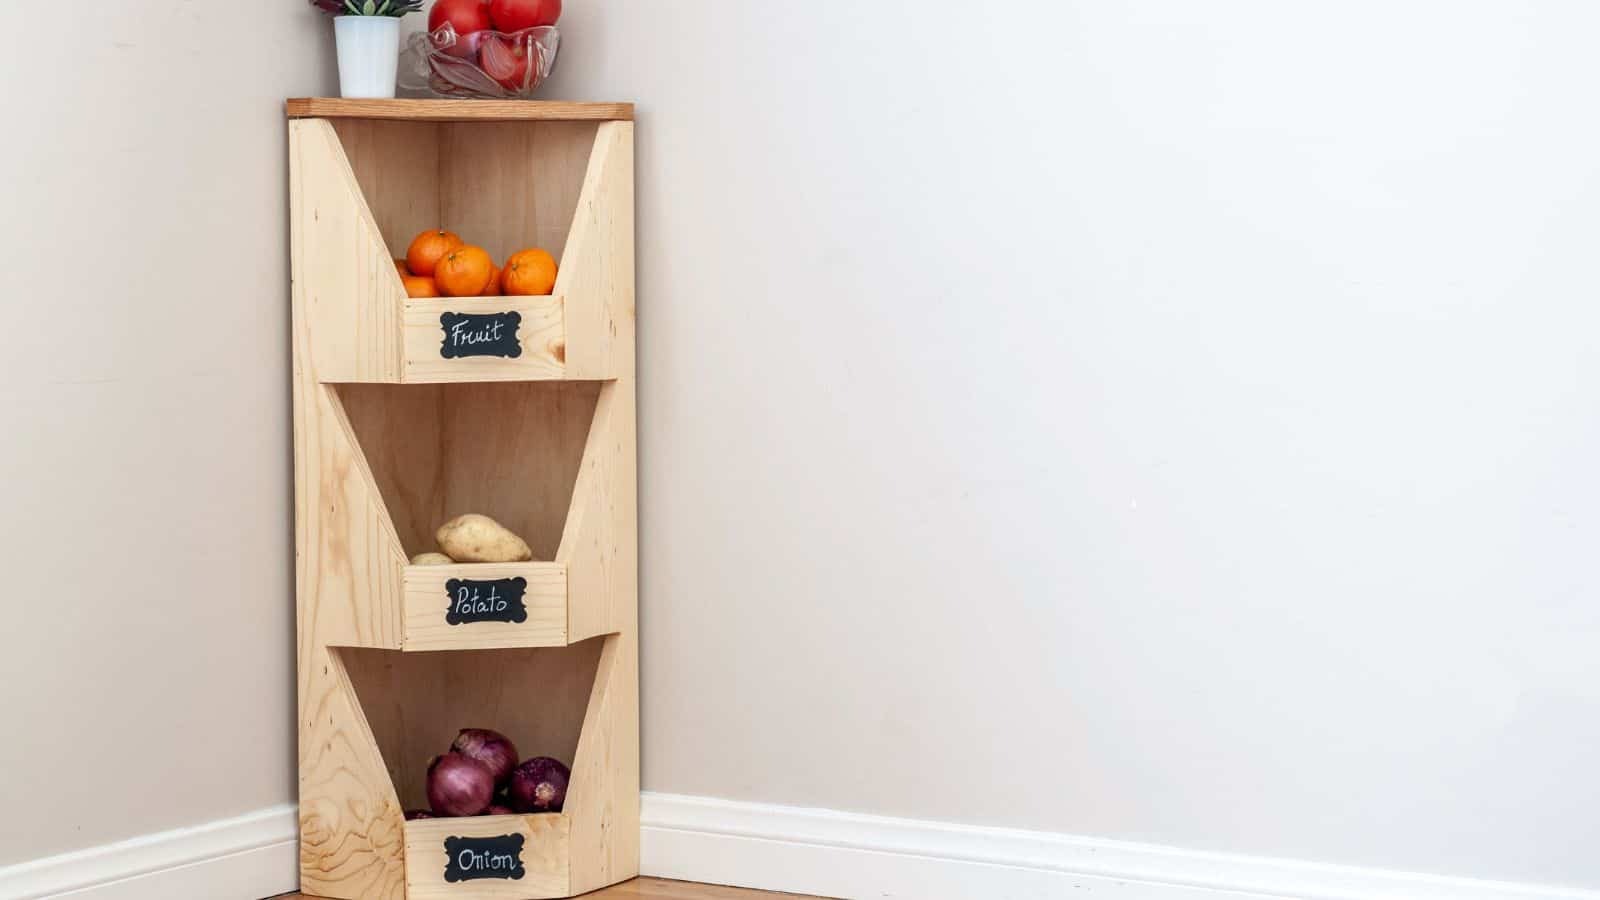 <p>Anything that helps with kitchen organization is a win. Get your kitchen organized with this easy beginner woodworking project. This DIY corner vegetable bin is great for root vegetables and even fruit. It fits in any corner, and it looks great too! <a href="https://www.anikasdiylife.com/diy-corner-vegetable-storage-bin/">See how to build it here.</a></p>